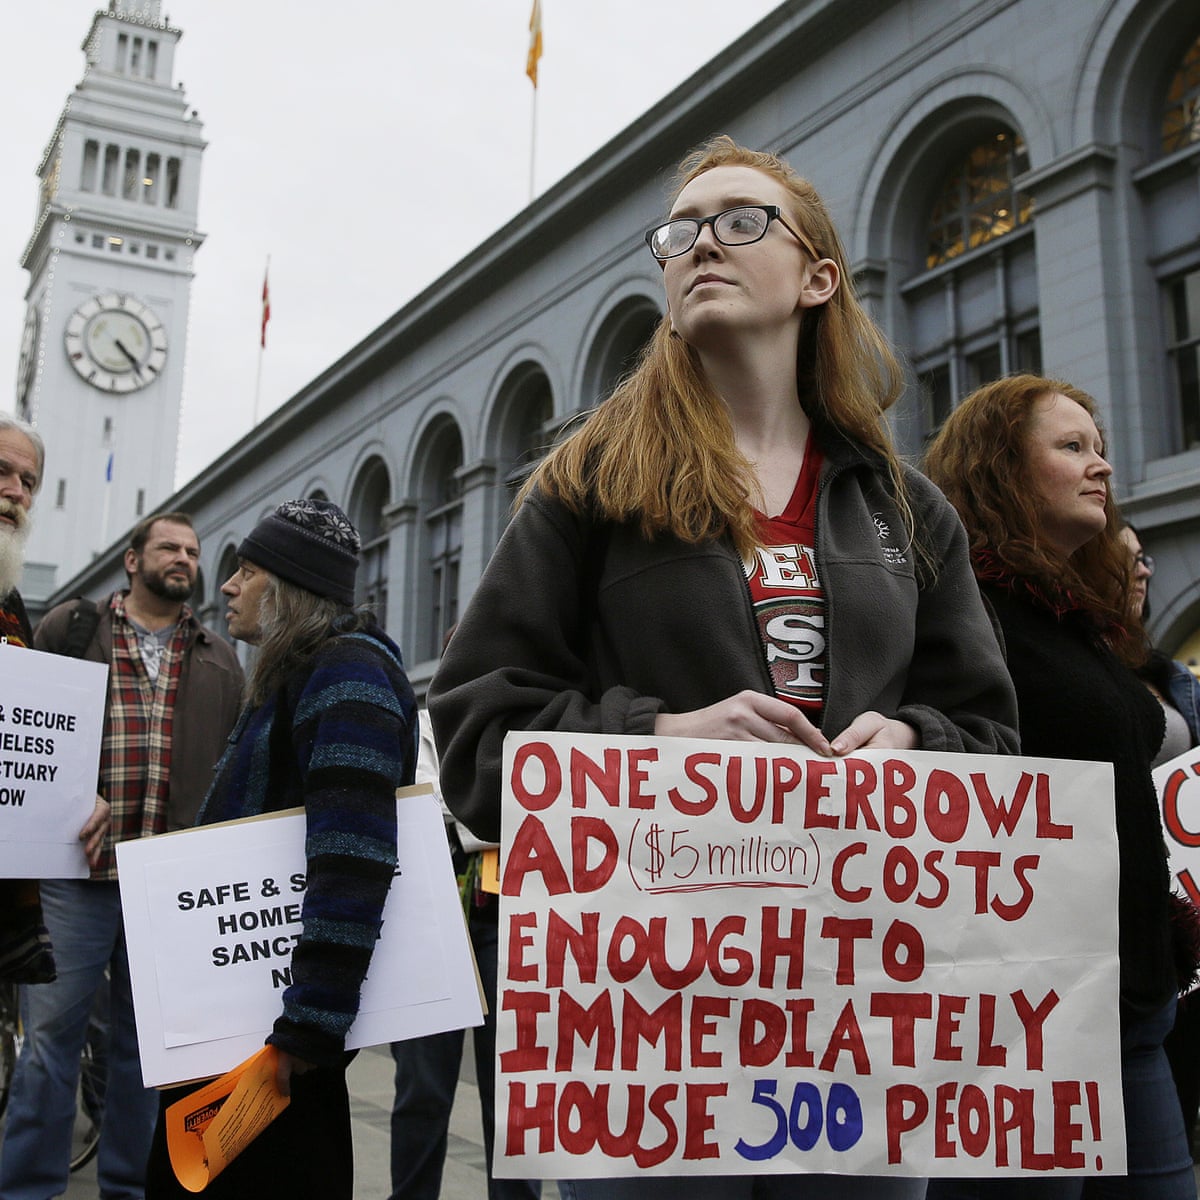 Super Bowl protests flare up over plight of San Francisco's homeless residents | San Francisco | The Guardian